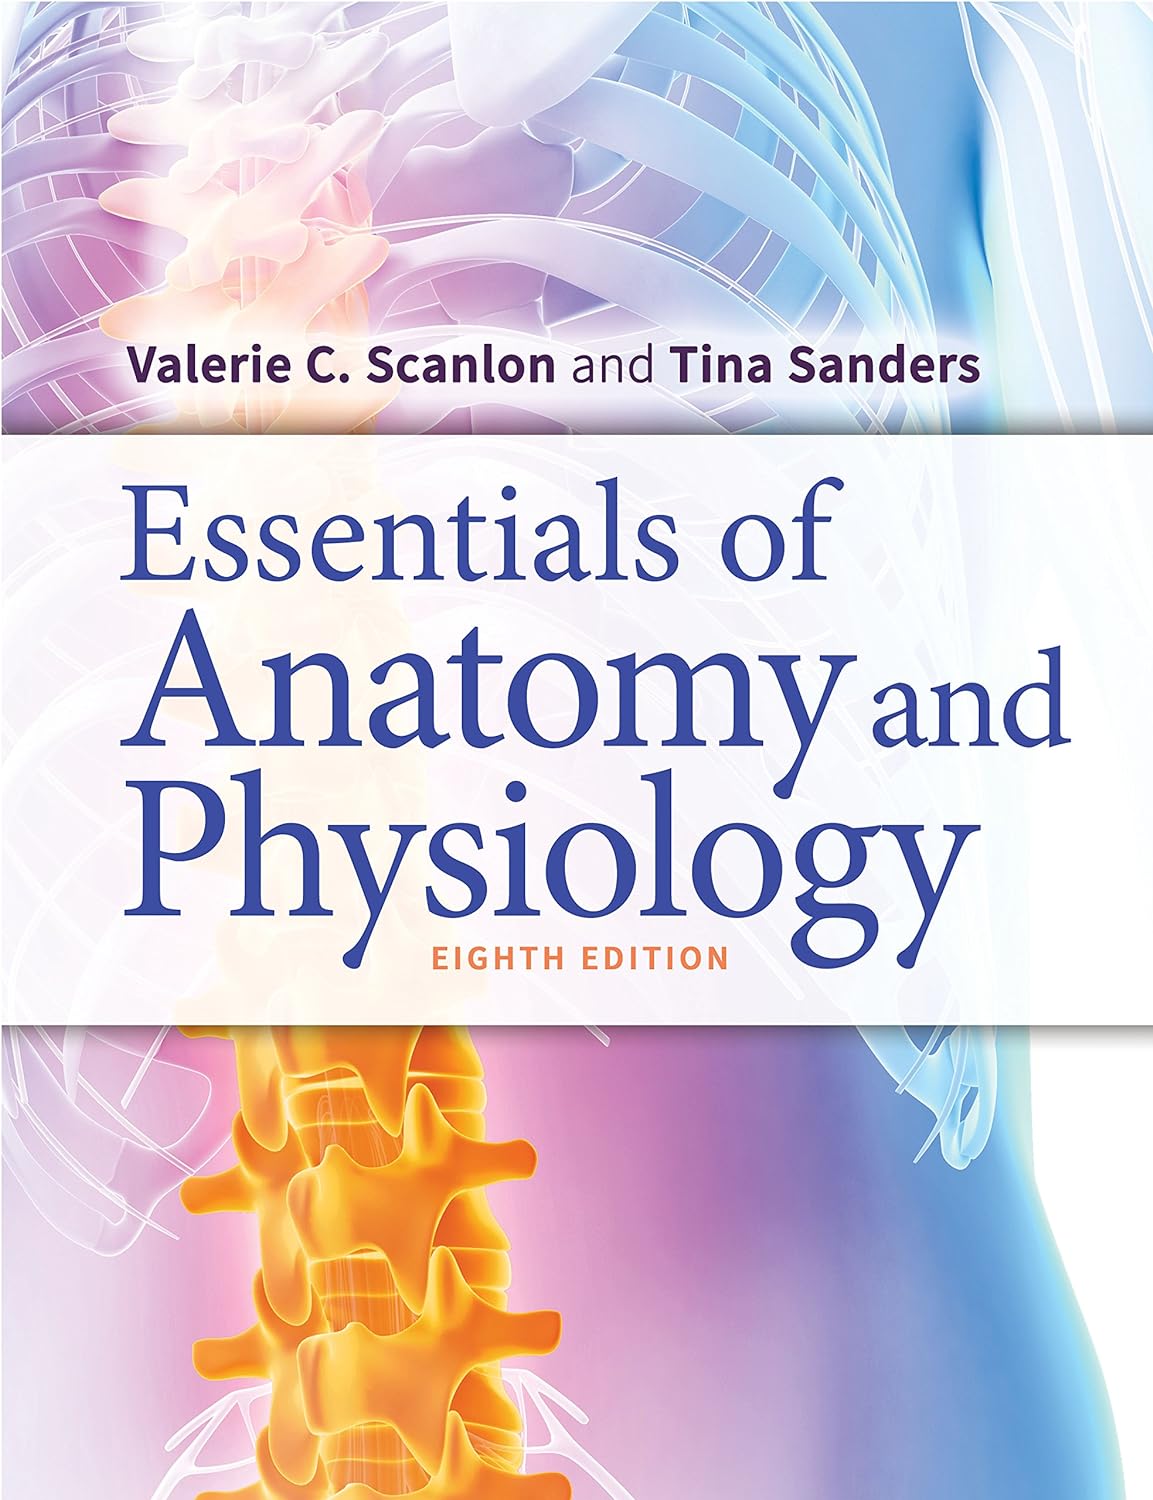 practice exam questions with test bank for Essentials of Anatomy and Physiology by Scanlon